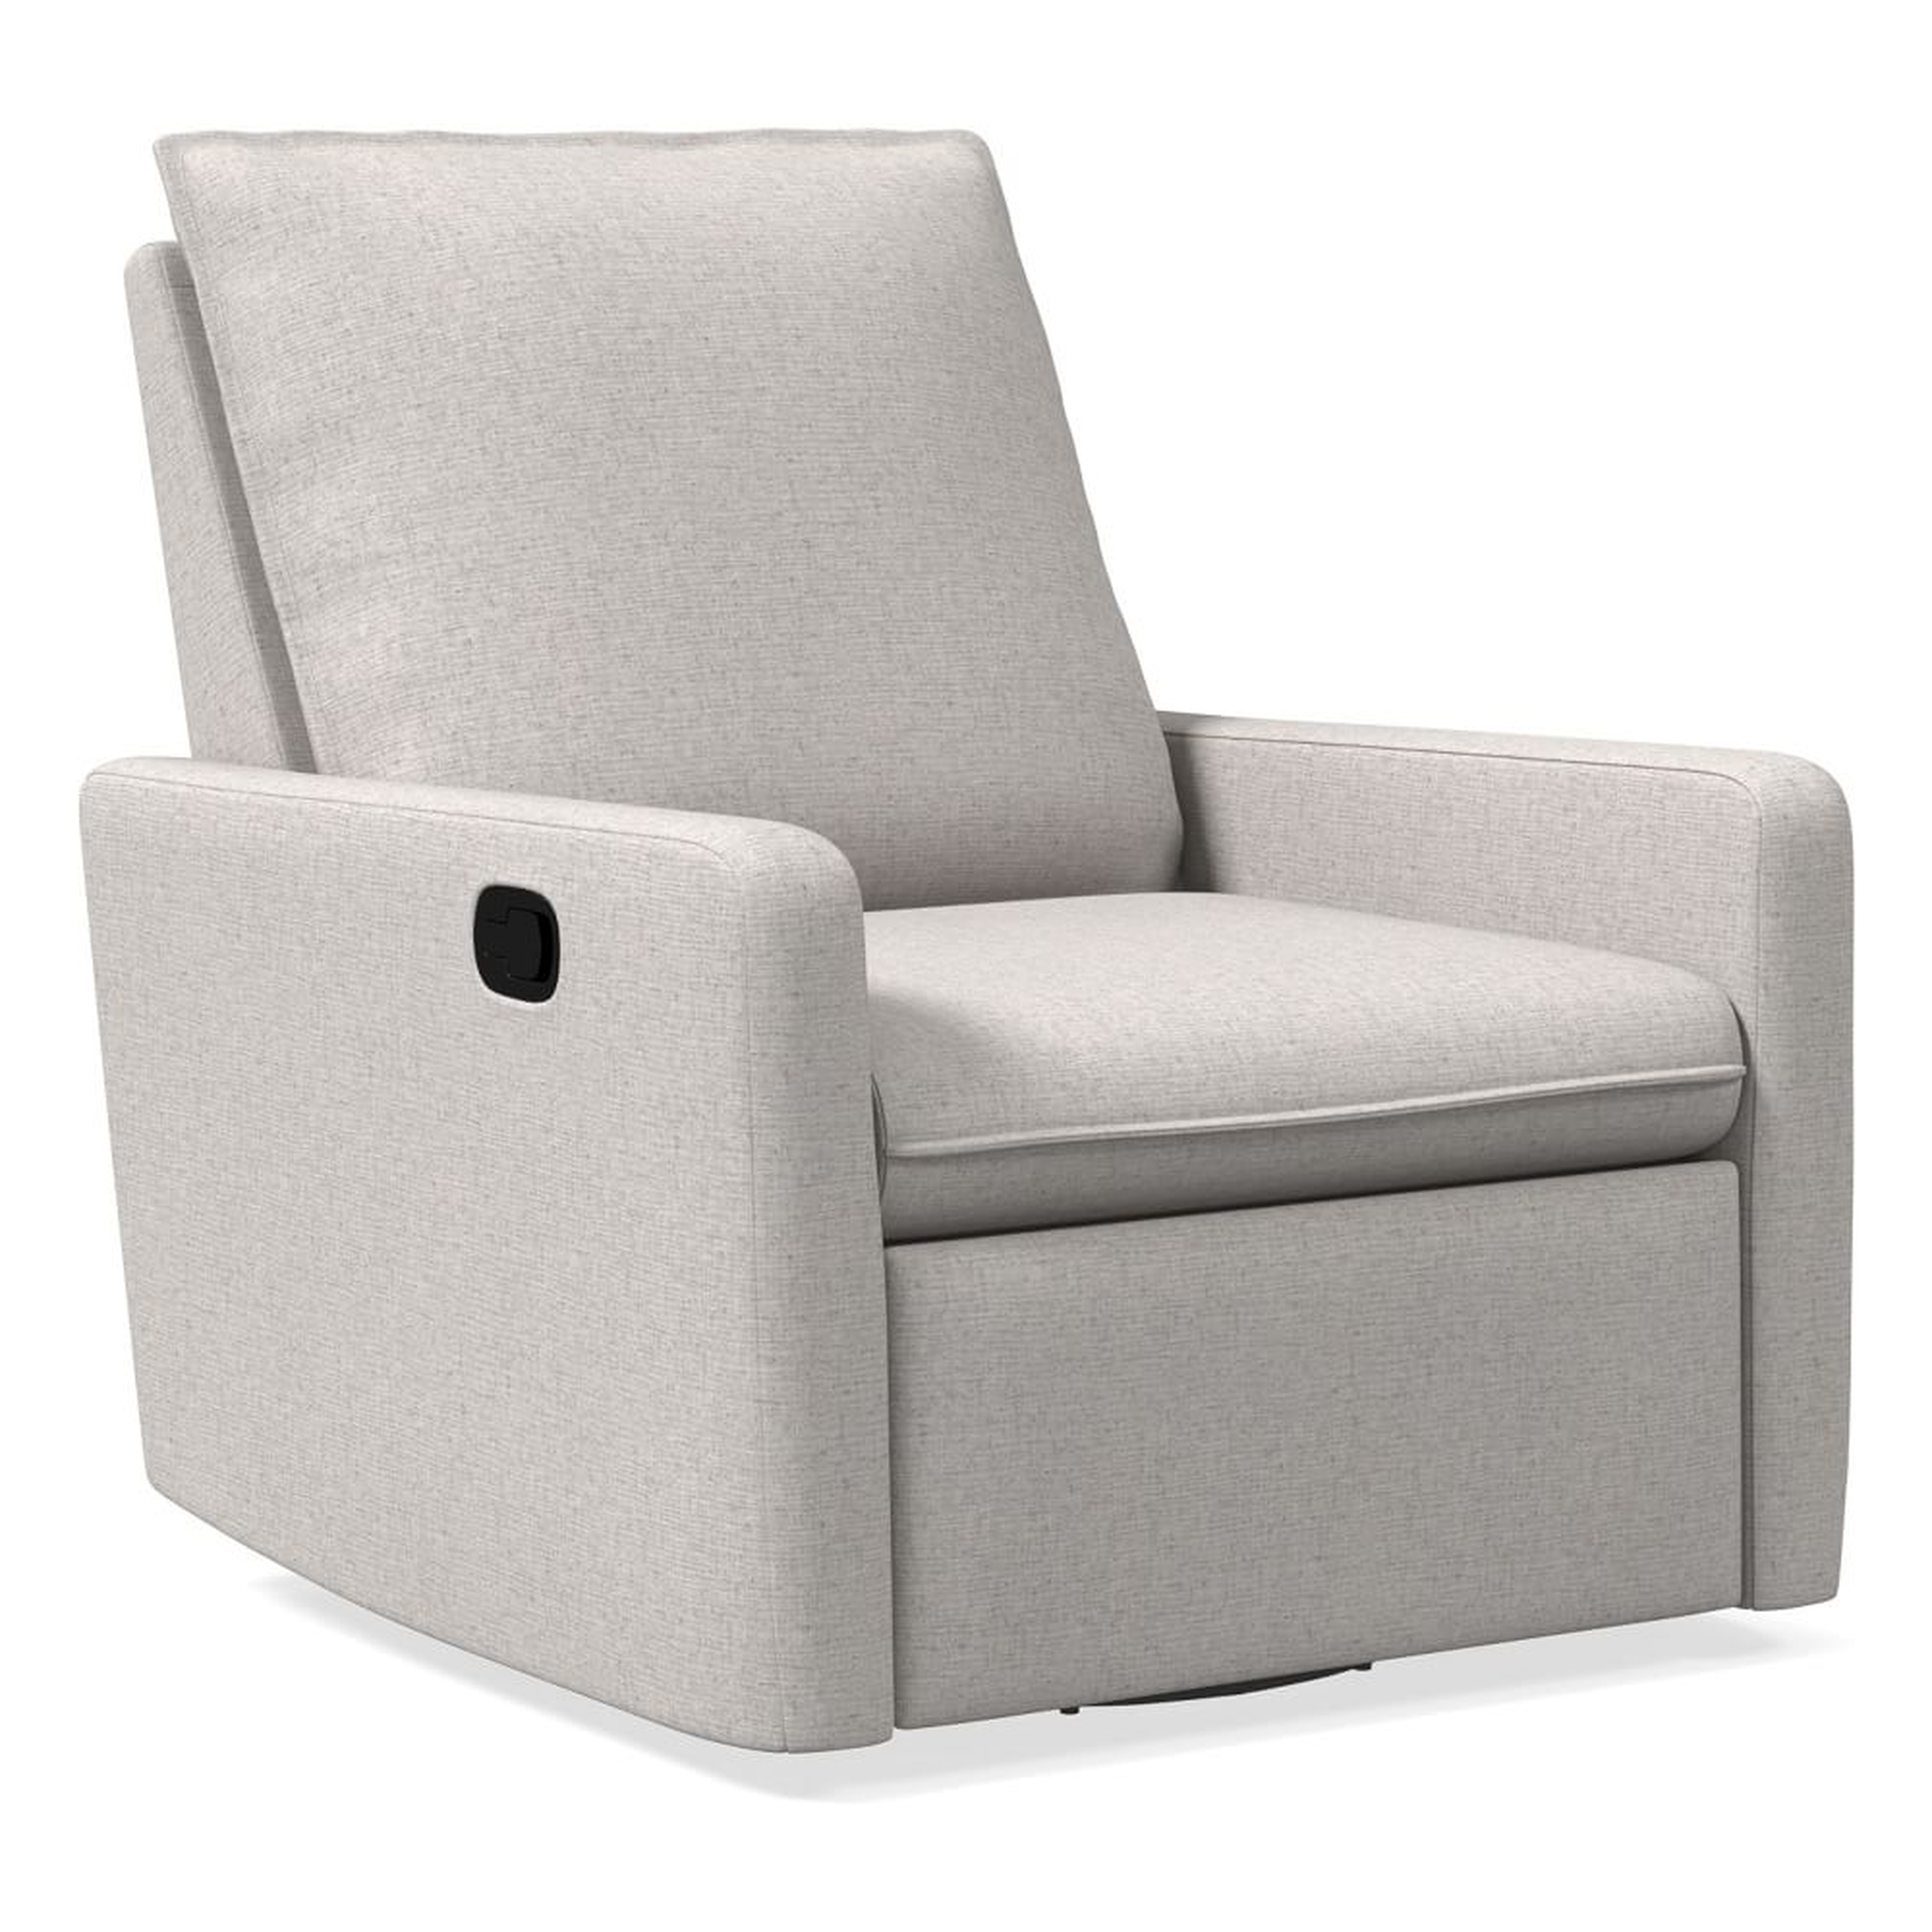 Paxton Swivel Glider and Recliner, Performance Coastal Linen Dove, WE Kids - West Elm